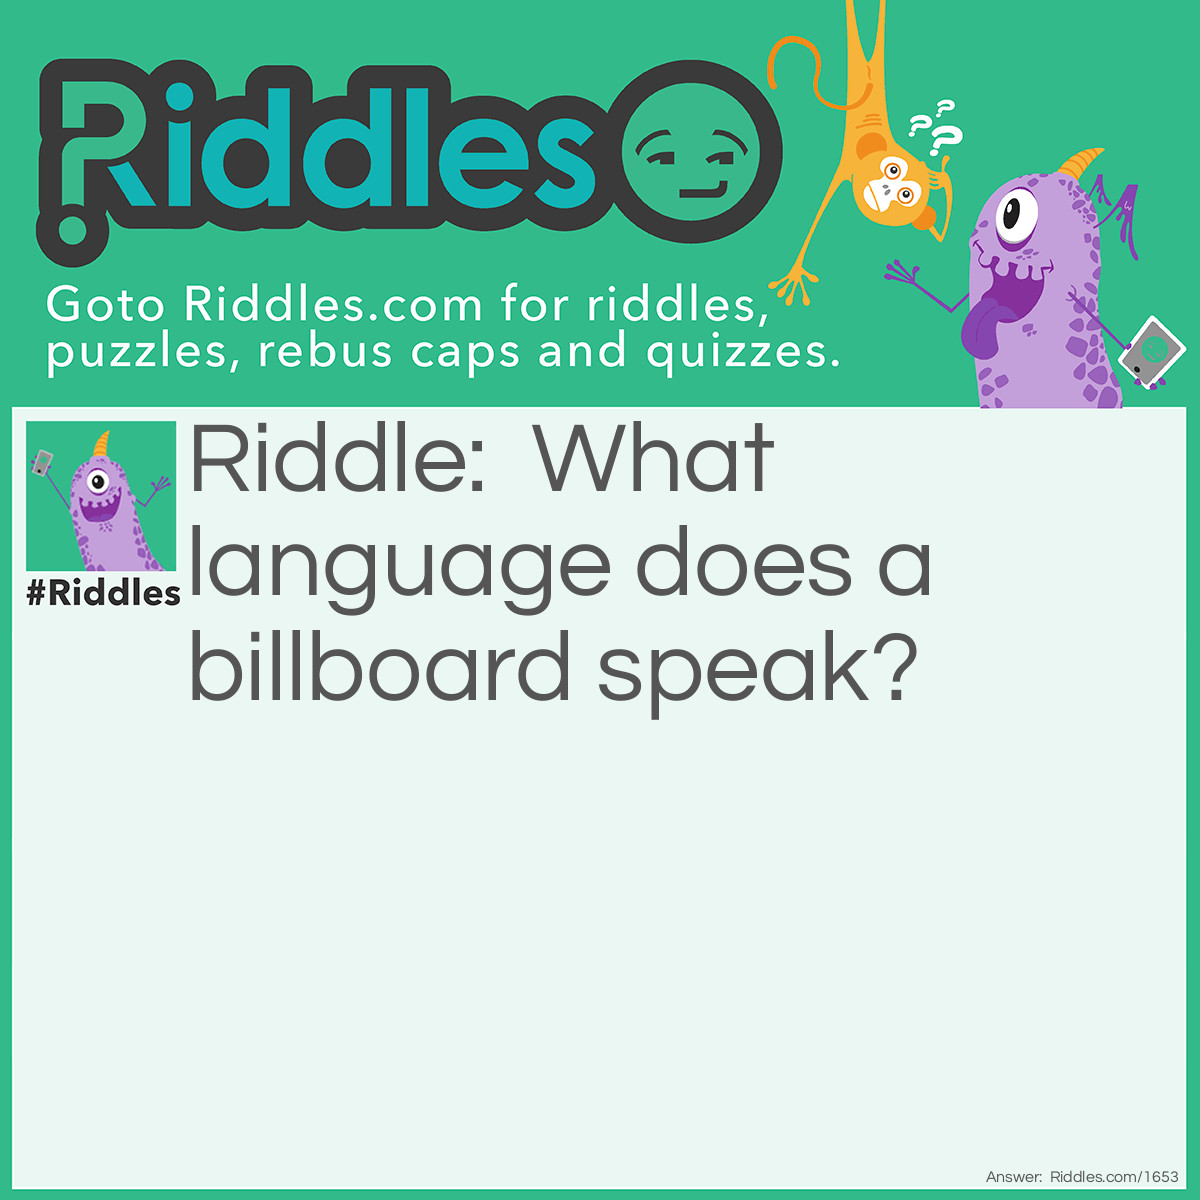 Riddle: What language does a billboard speak? Answer: Sign language.